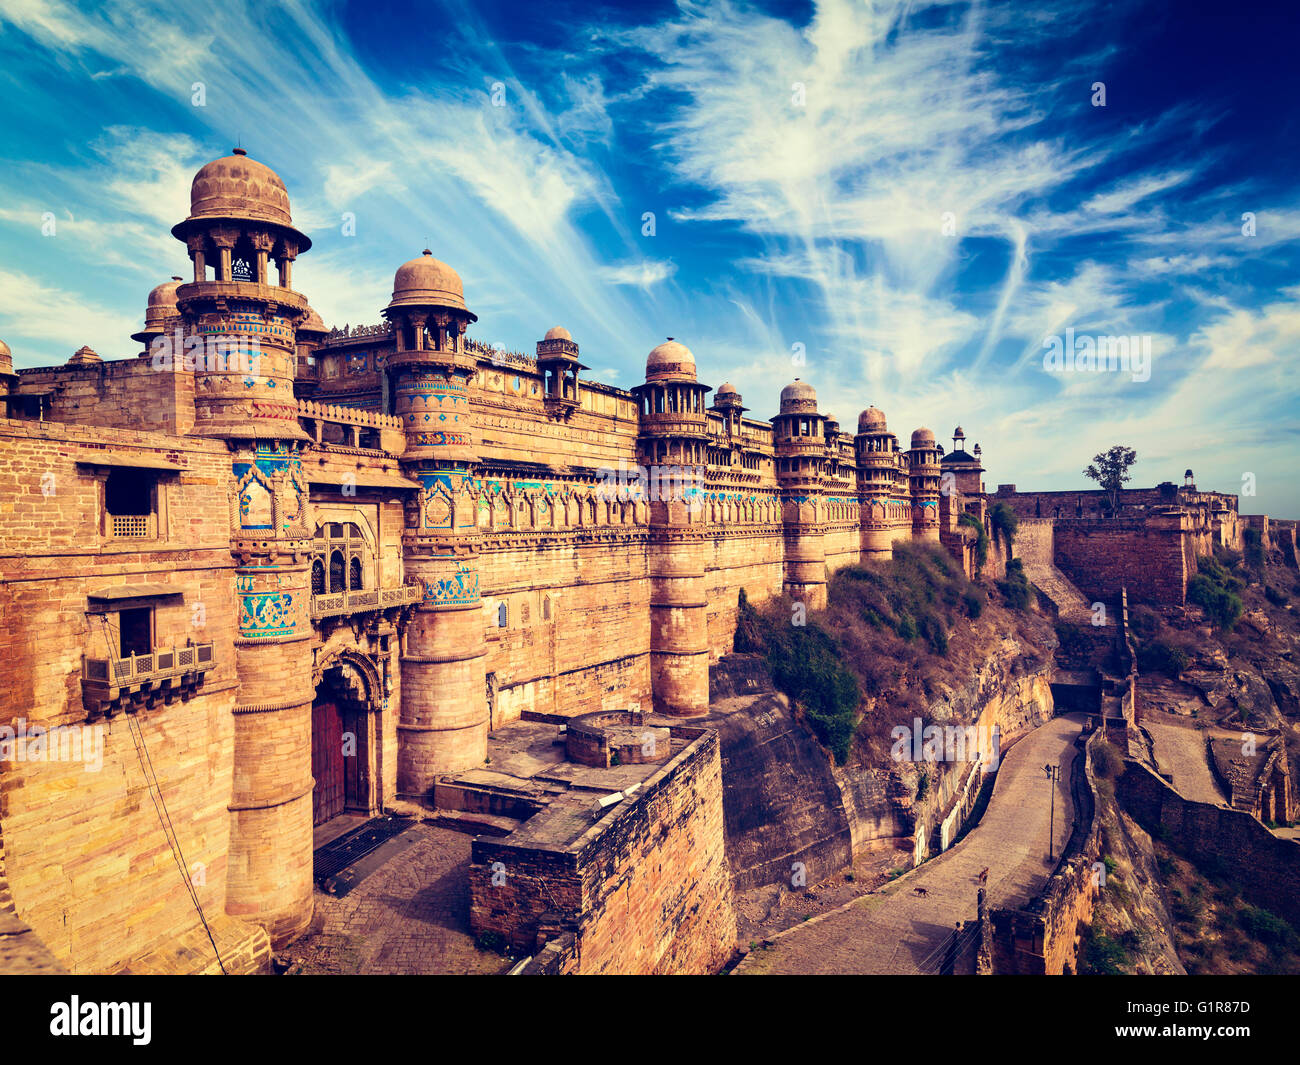 Gwalior fort, India Stock Photo